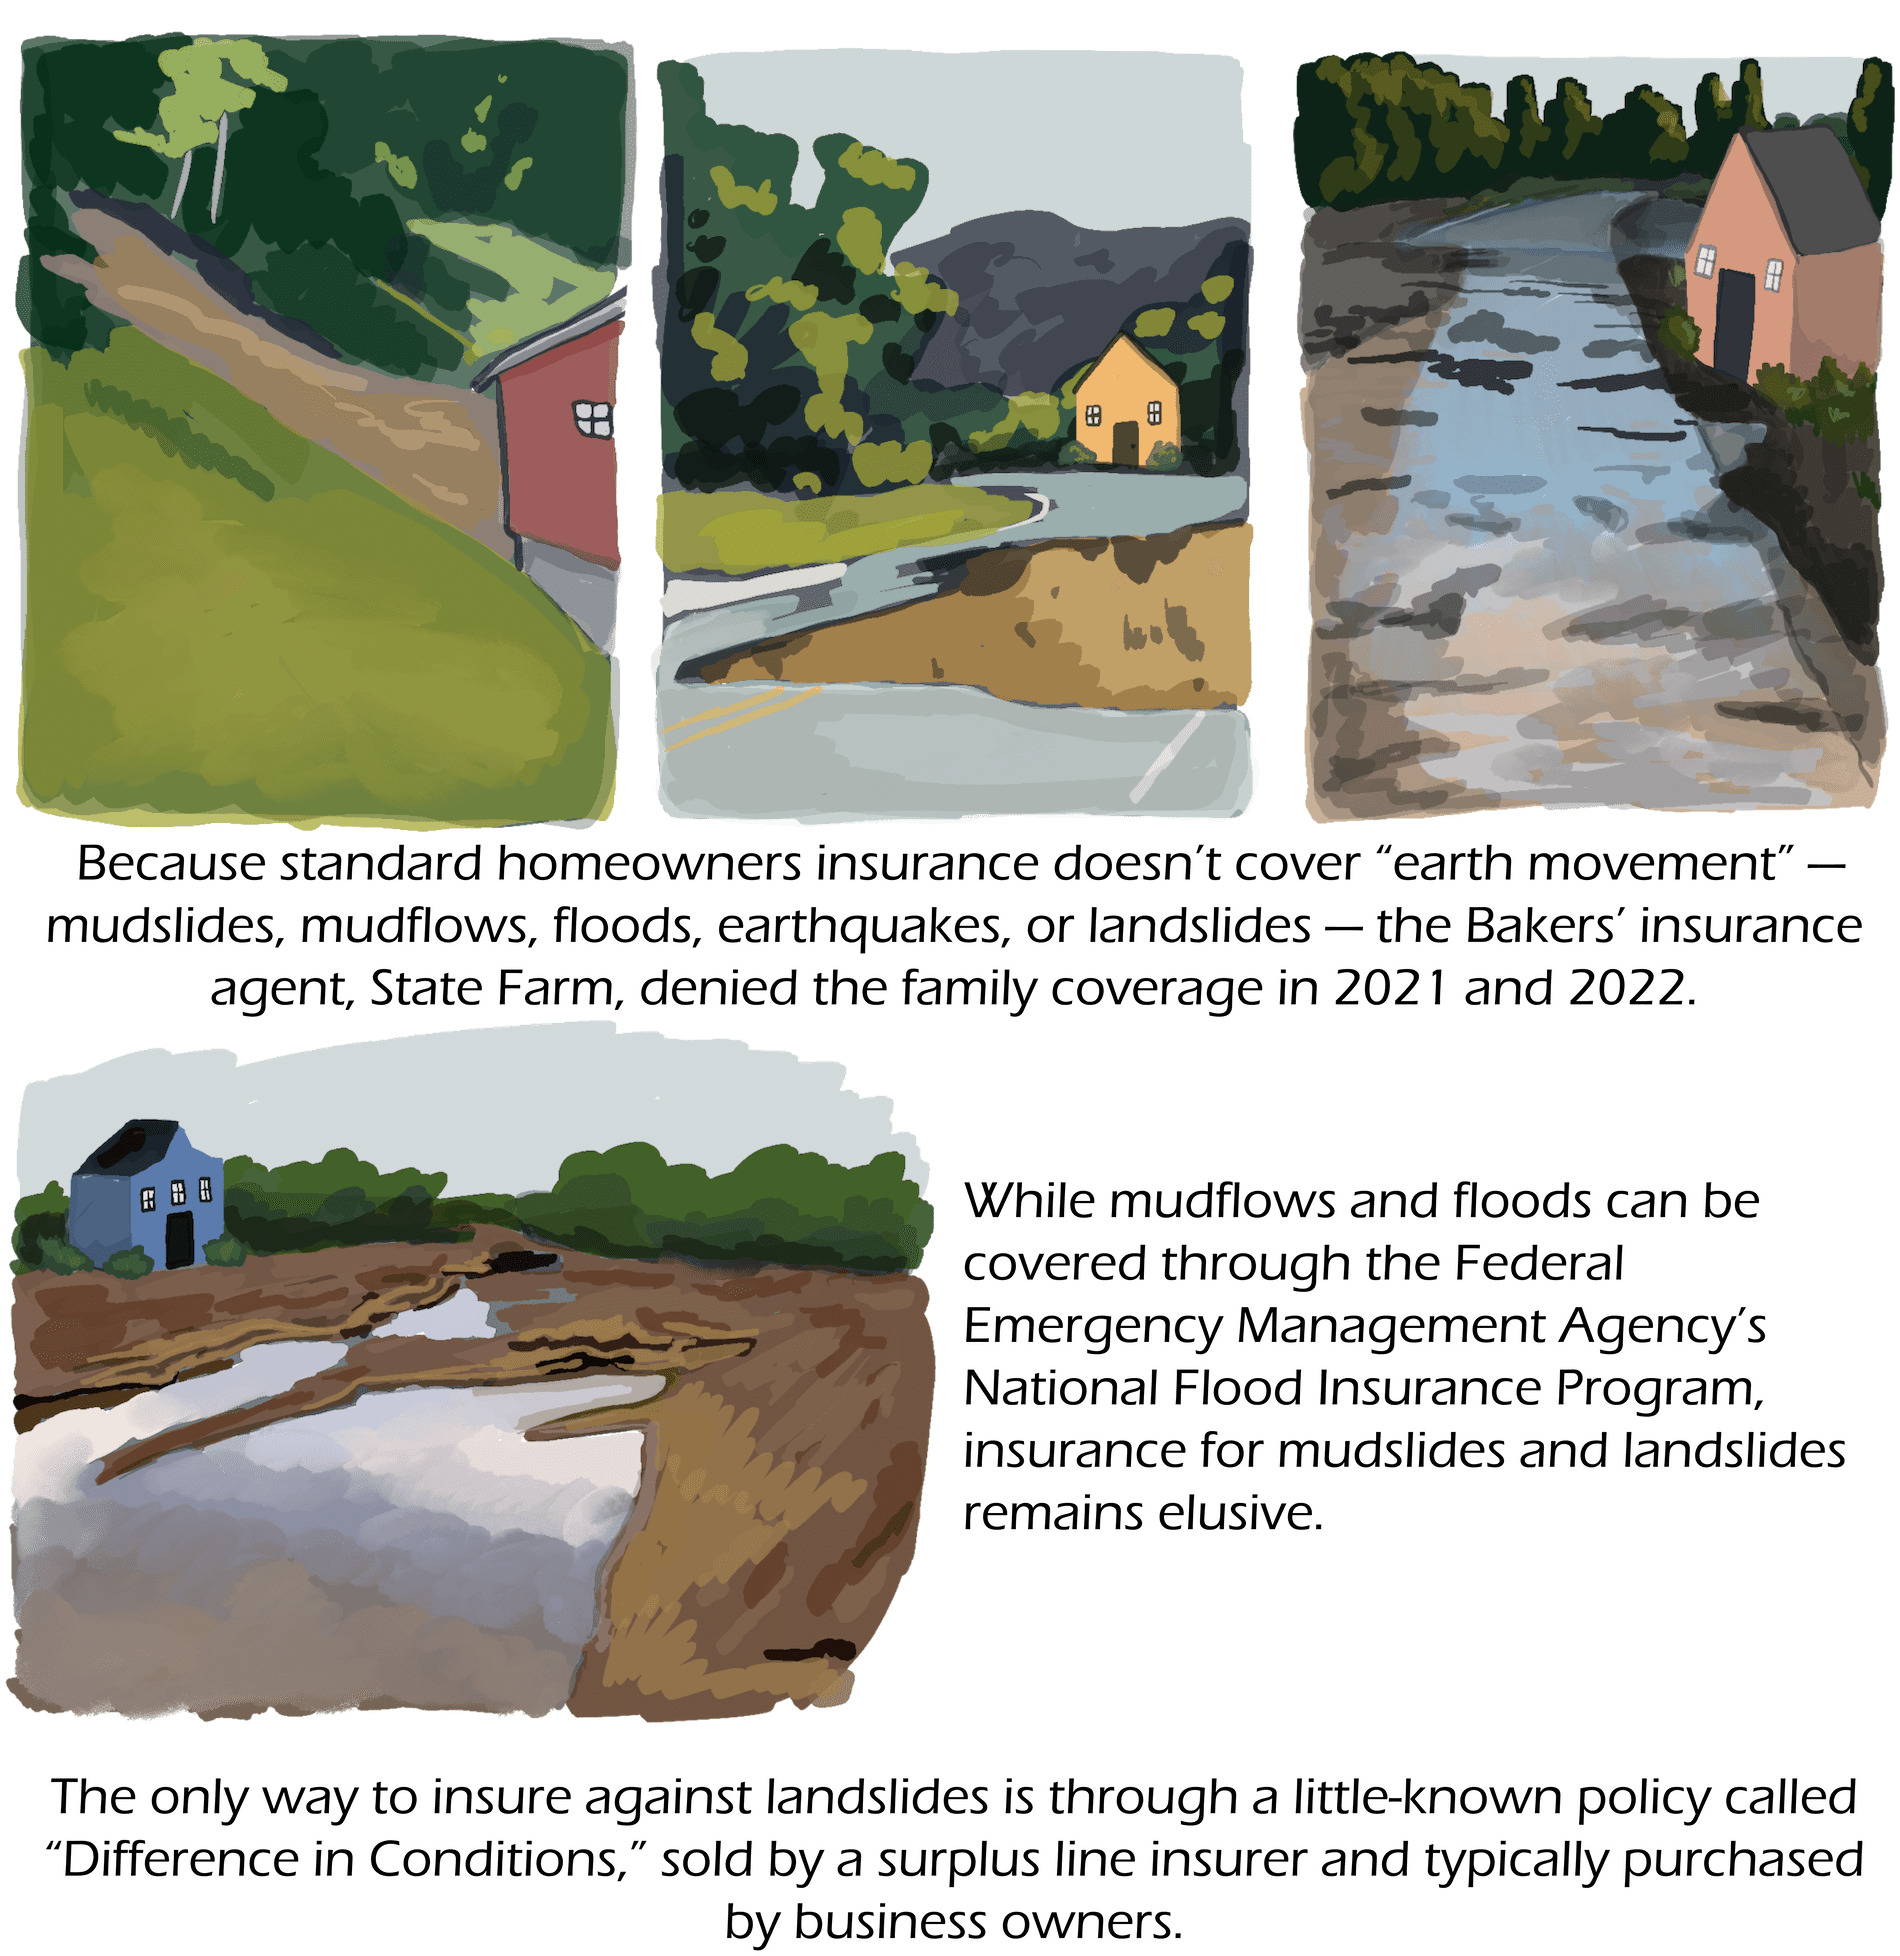 four small panels showing flood scenes of houses and roads. Text: Because standard homeowners insurance doesn’t cover “earth movement” — mudslides, mudflows, floods, earthquakes, or landslides — the Bakers’ insurance agent, State Farm, denied the family coverage in 2021 and 2022. While mudflows and floods can be covered through the Federal Emergency Management Agency’s National Flood Insurance Program, insurance for mudslides and landslides remains elusive. The only way to insure against landslides is through a little-known policy called “Difference in Conditions,” sold by a surplus line insurer and typically purchased by business owners.